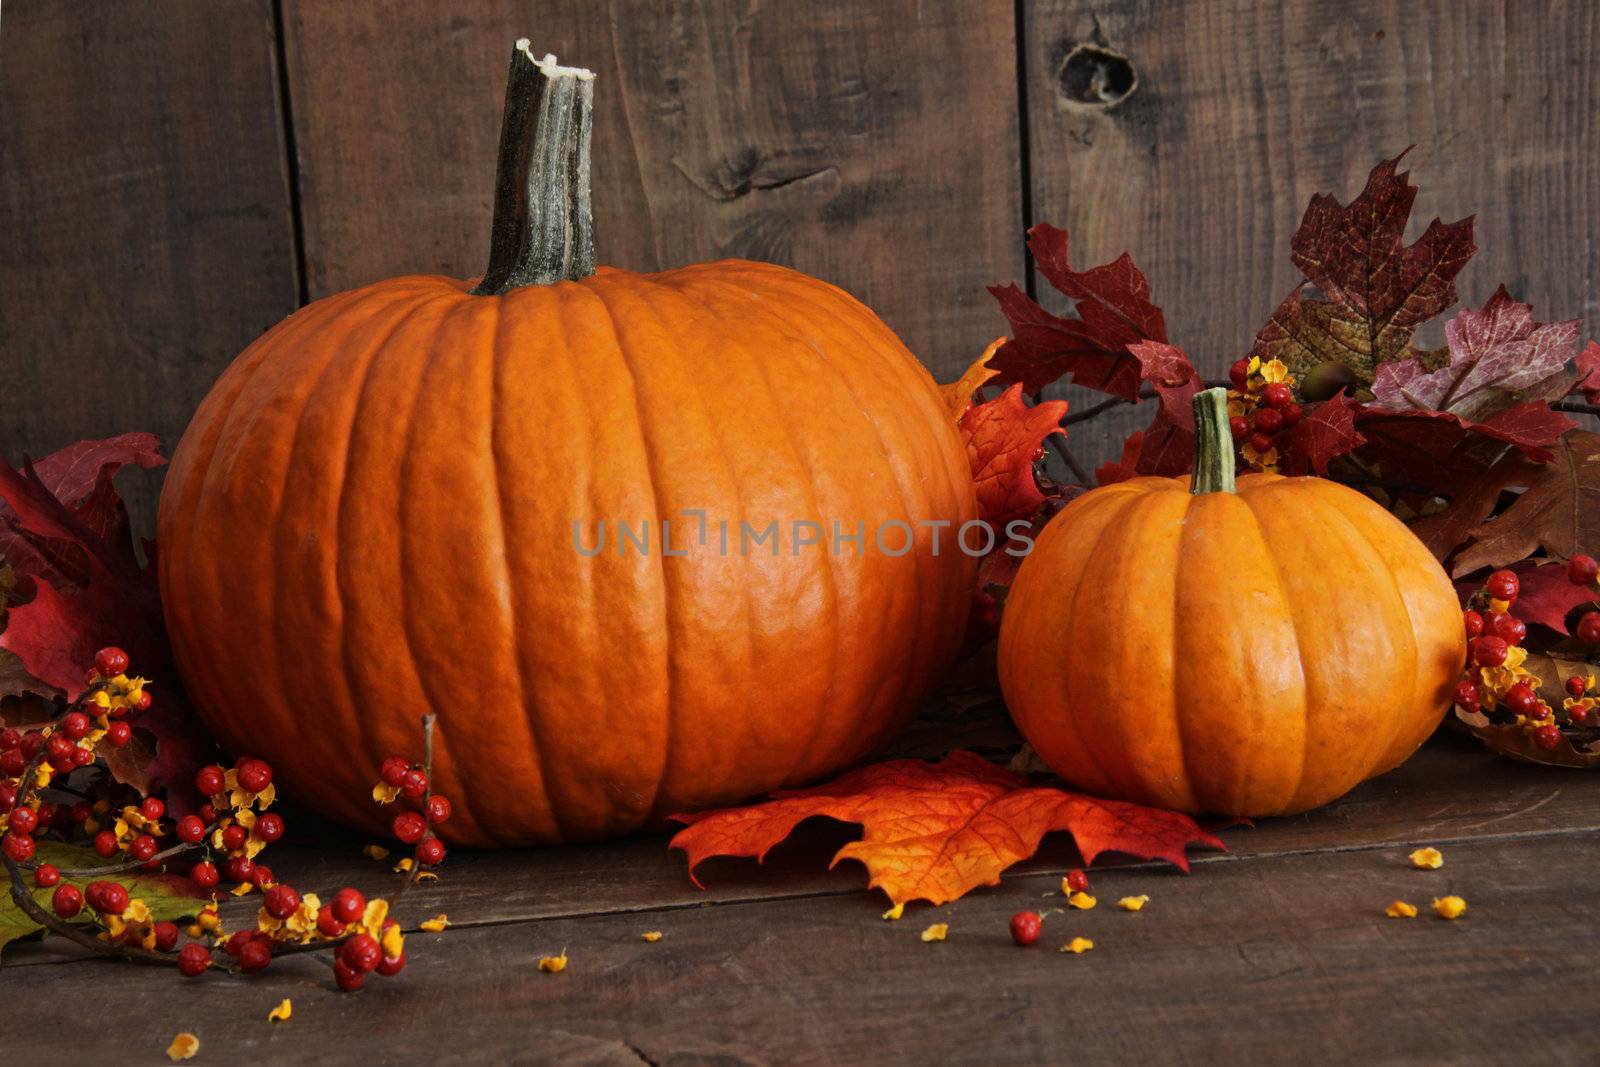 Harvested pumpkins on wood table with dark background